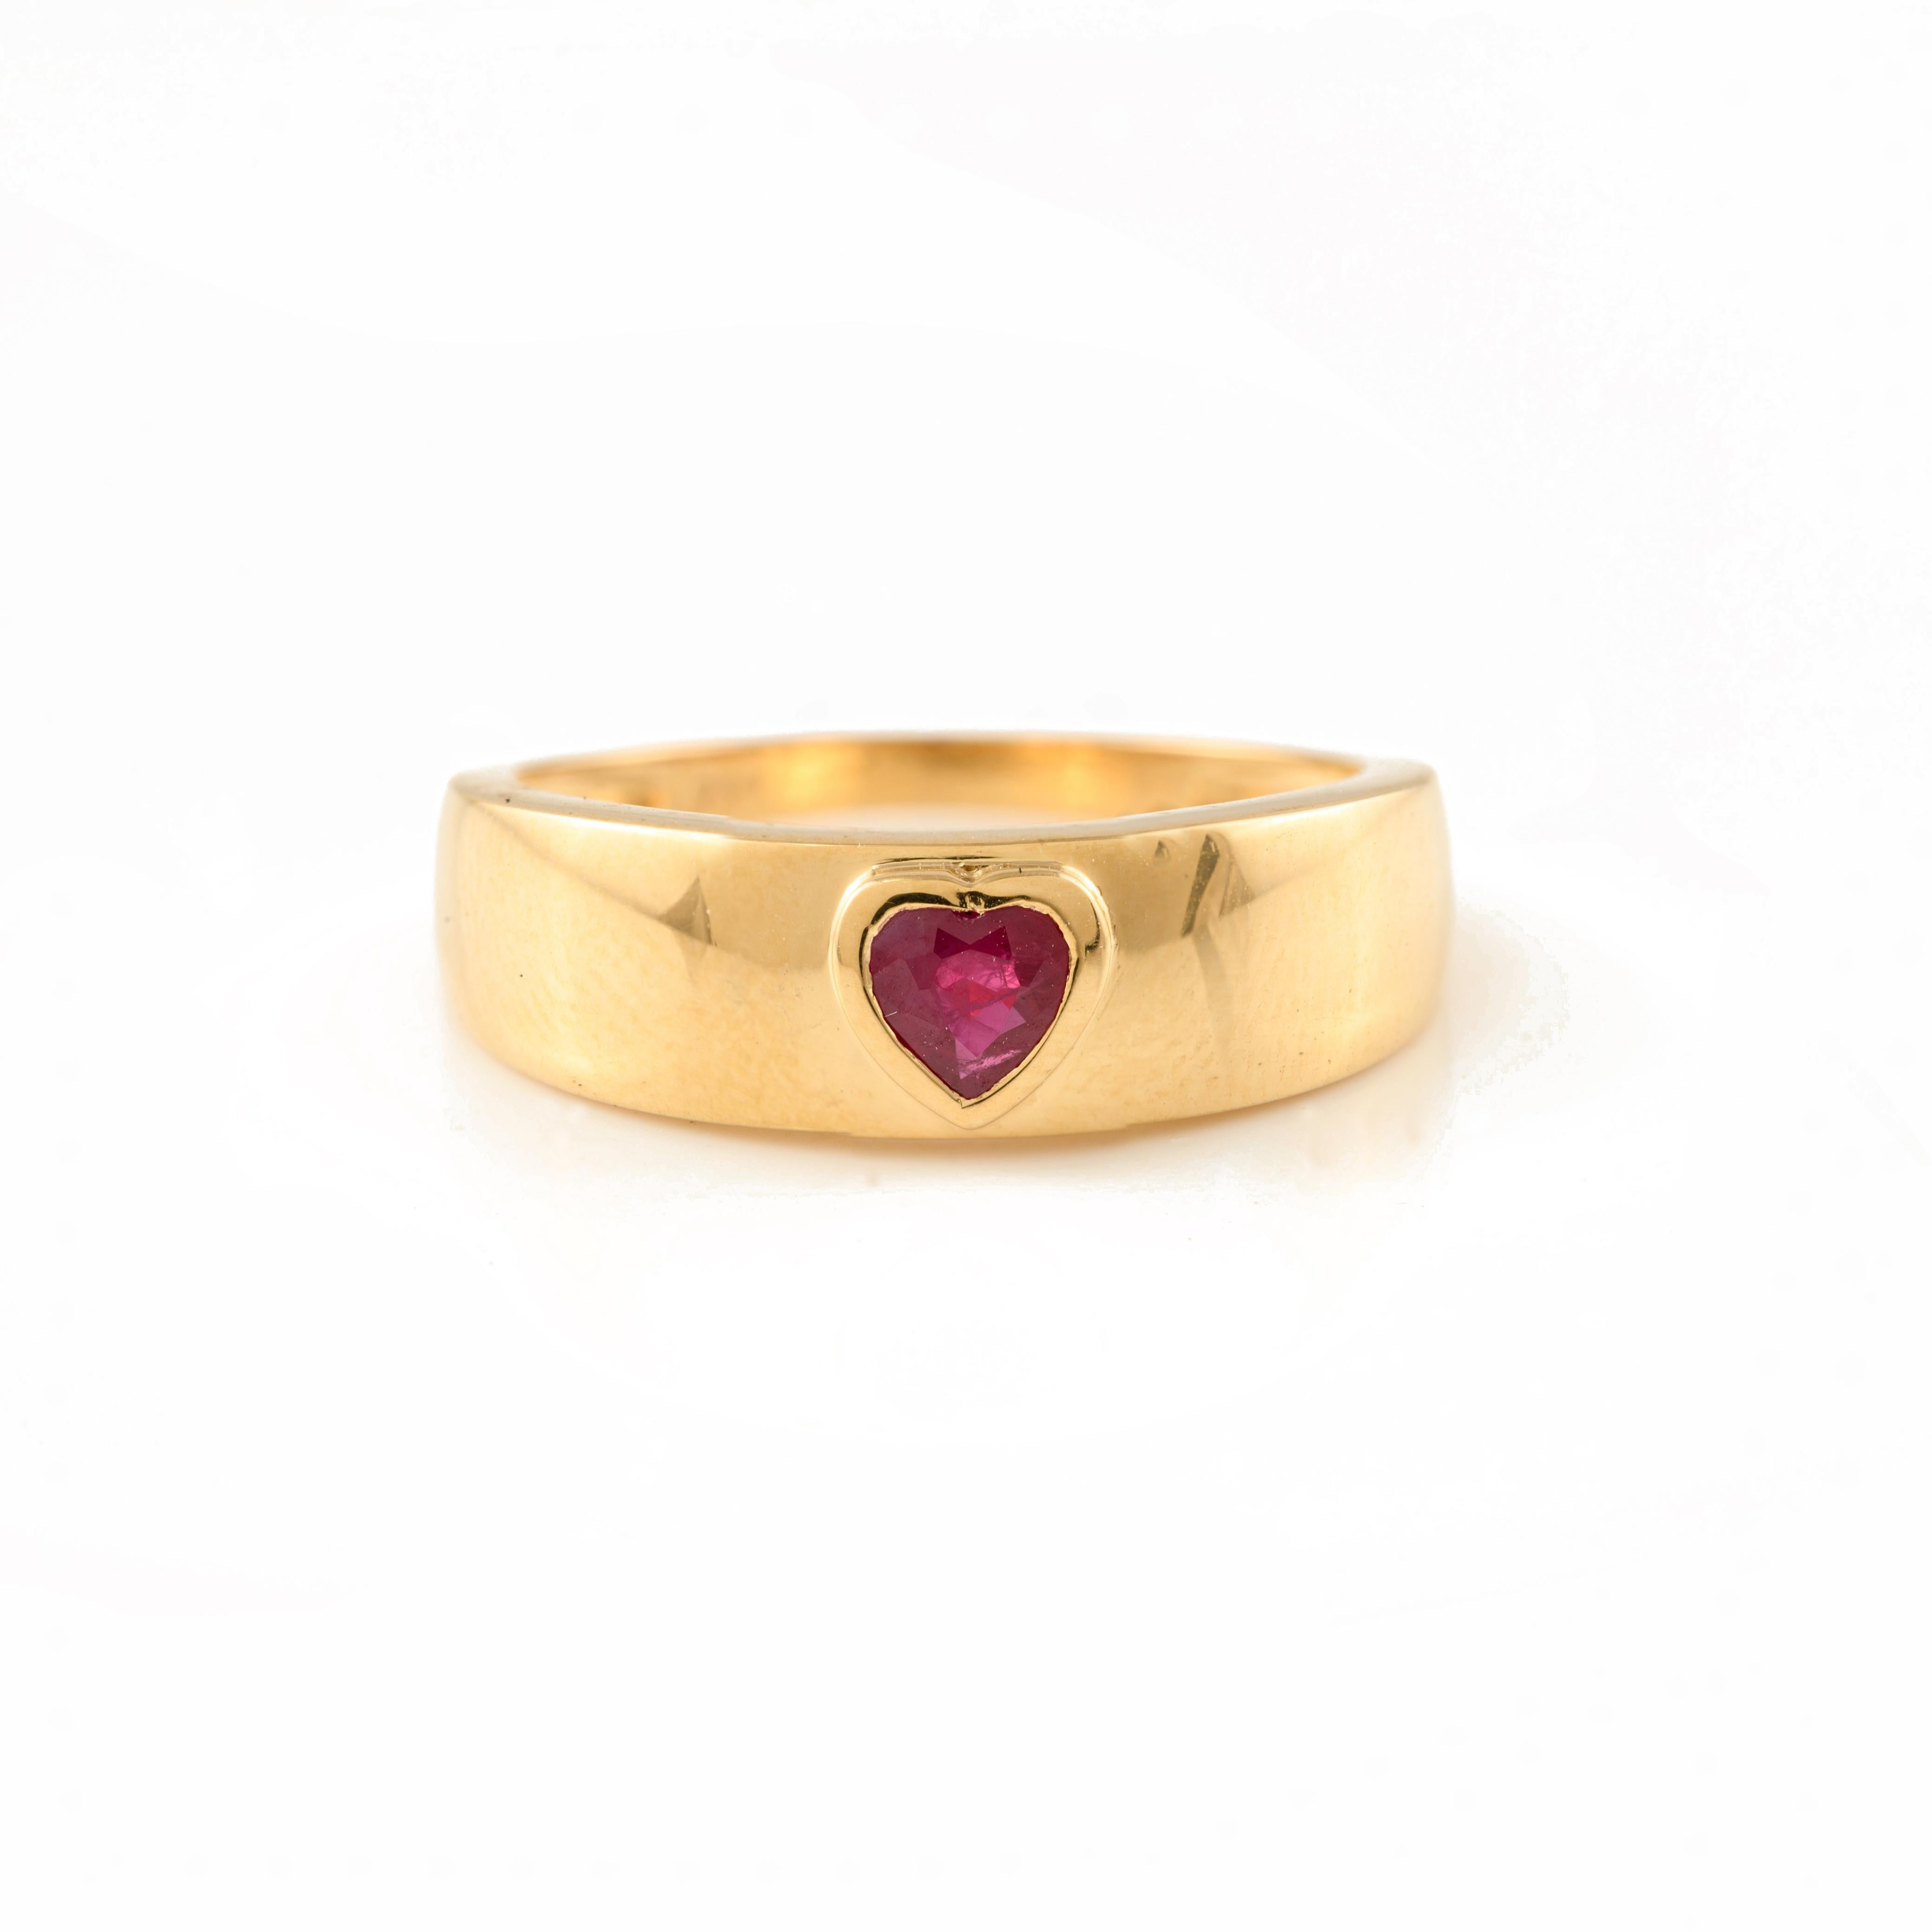 For Sale:  Dainty Heart Cut Ruby Mens Ring in 18k Solid Yellow Gold, Signet Ring for Her 7